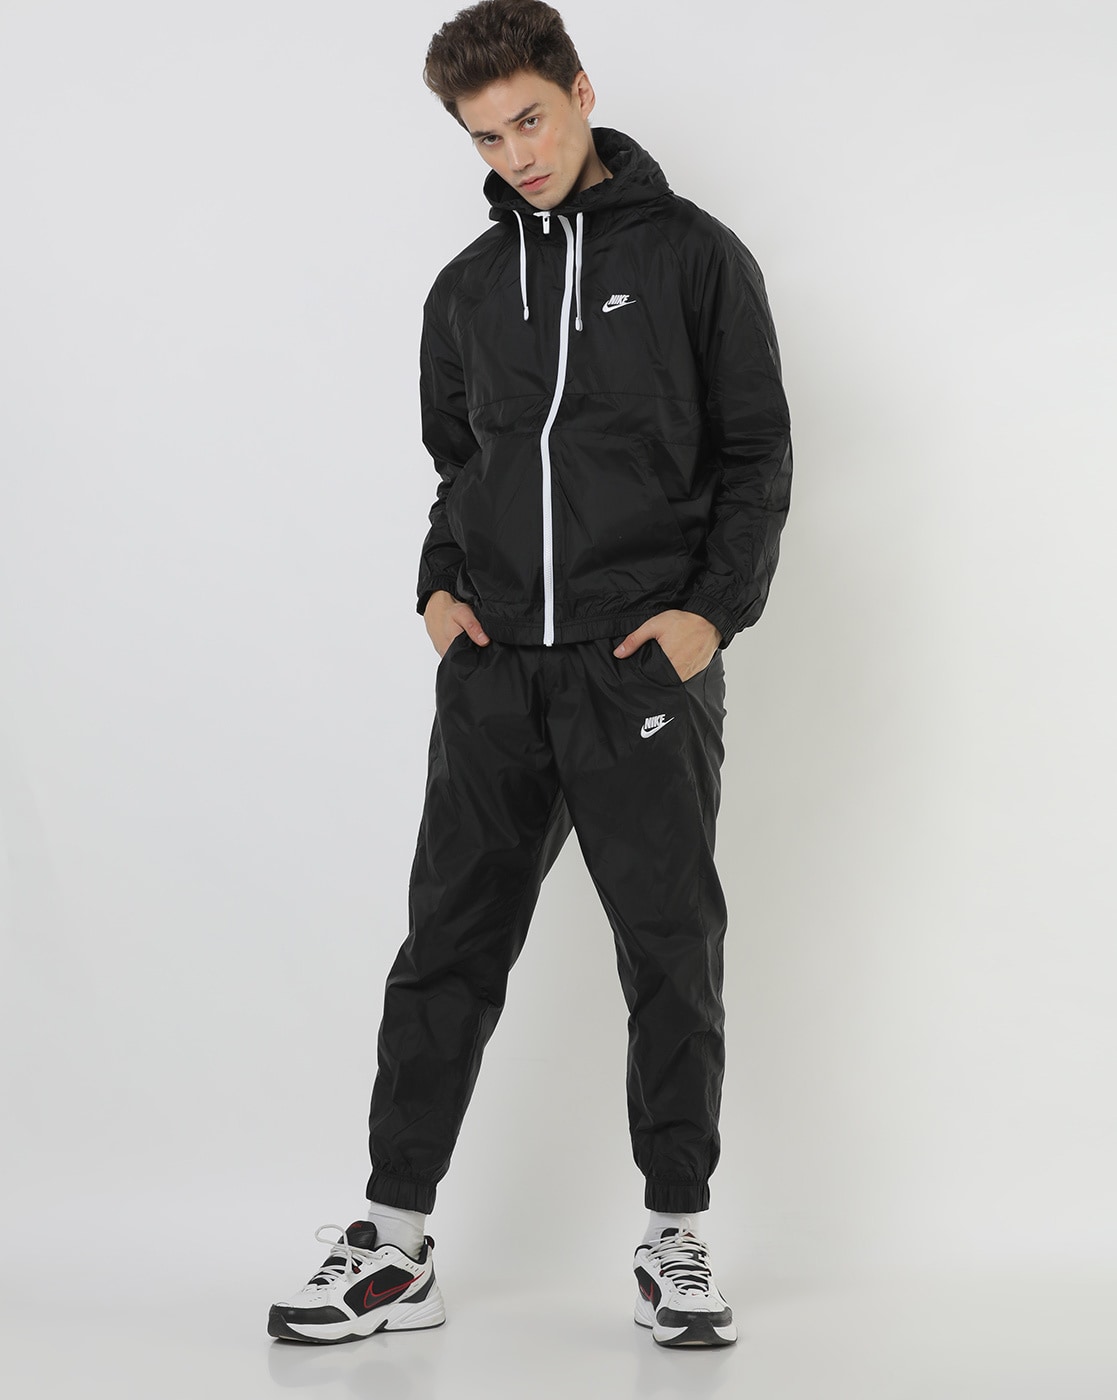 Buy Black Tracksuits for Men by NIKE Online | Ajio.com